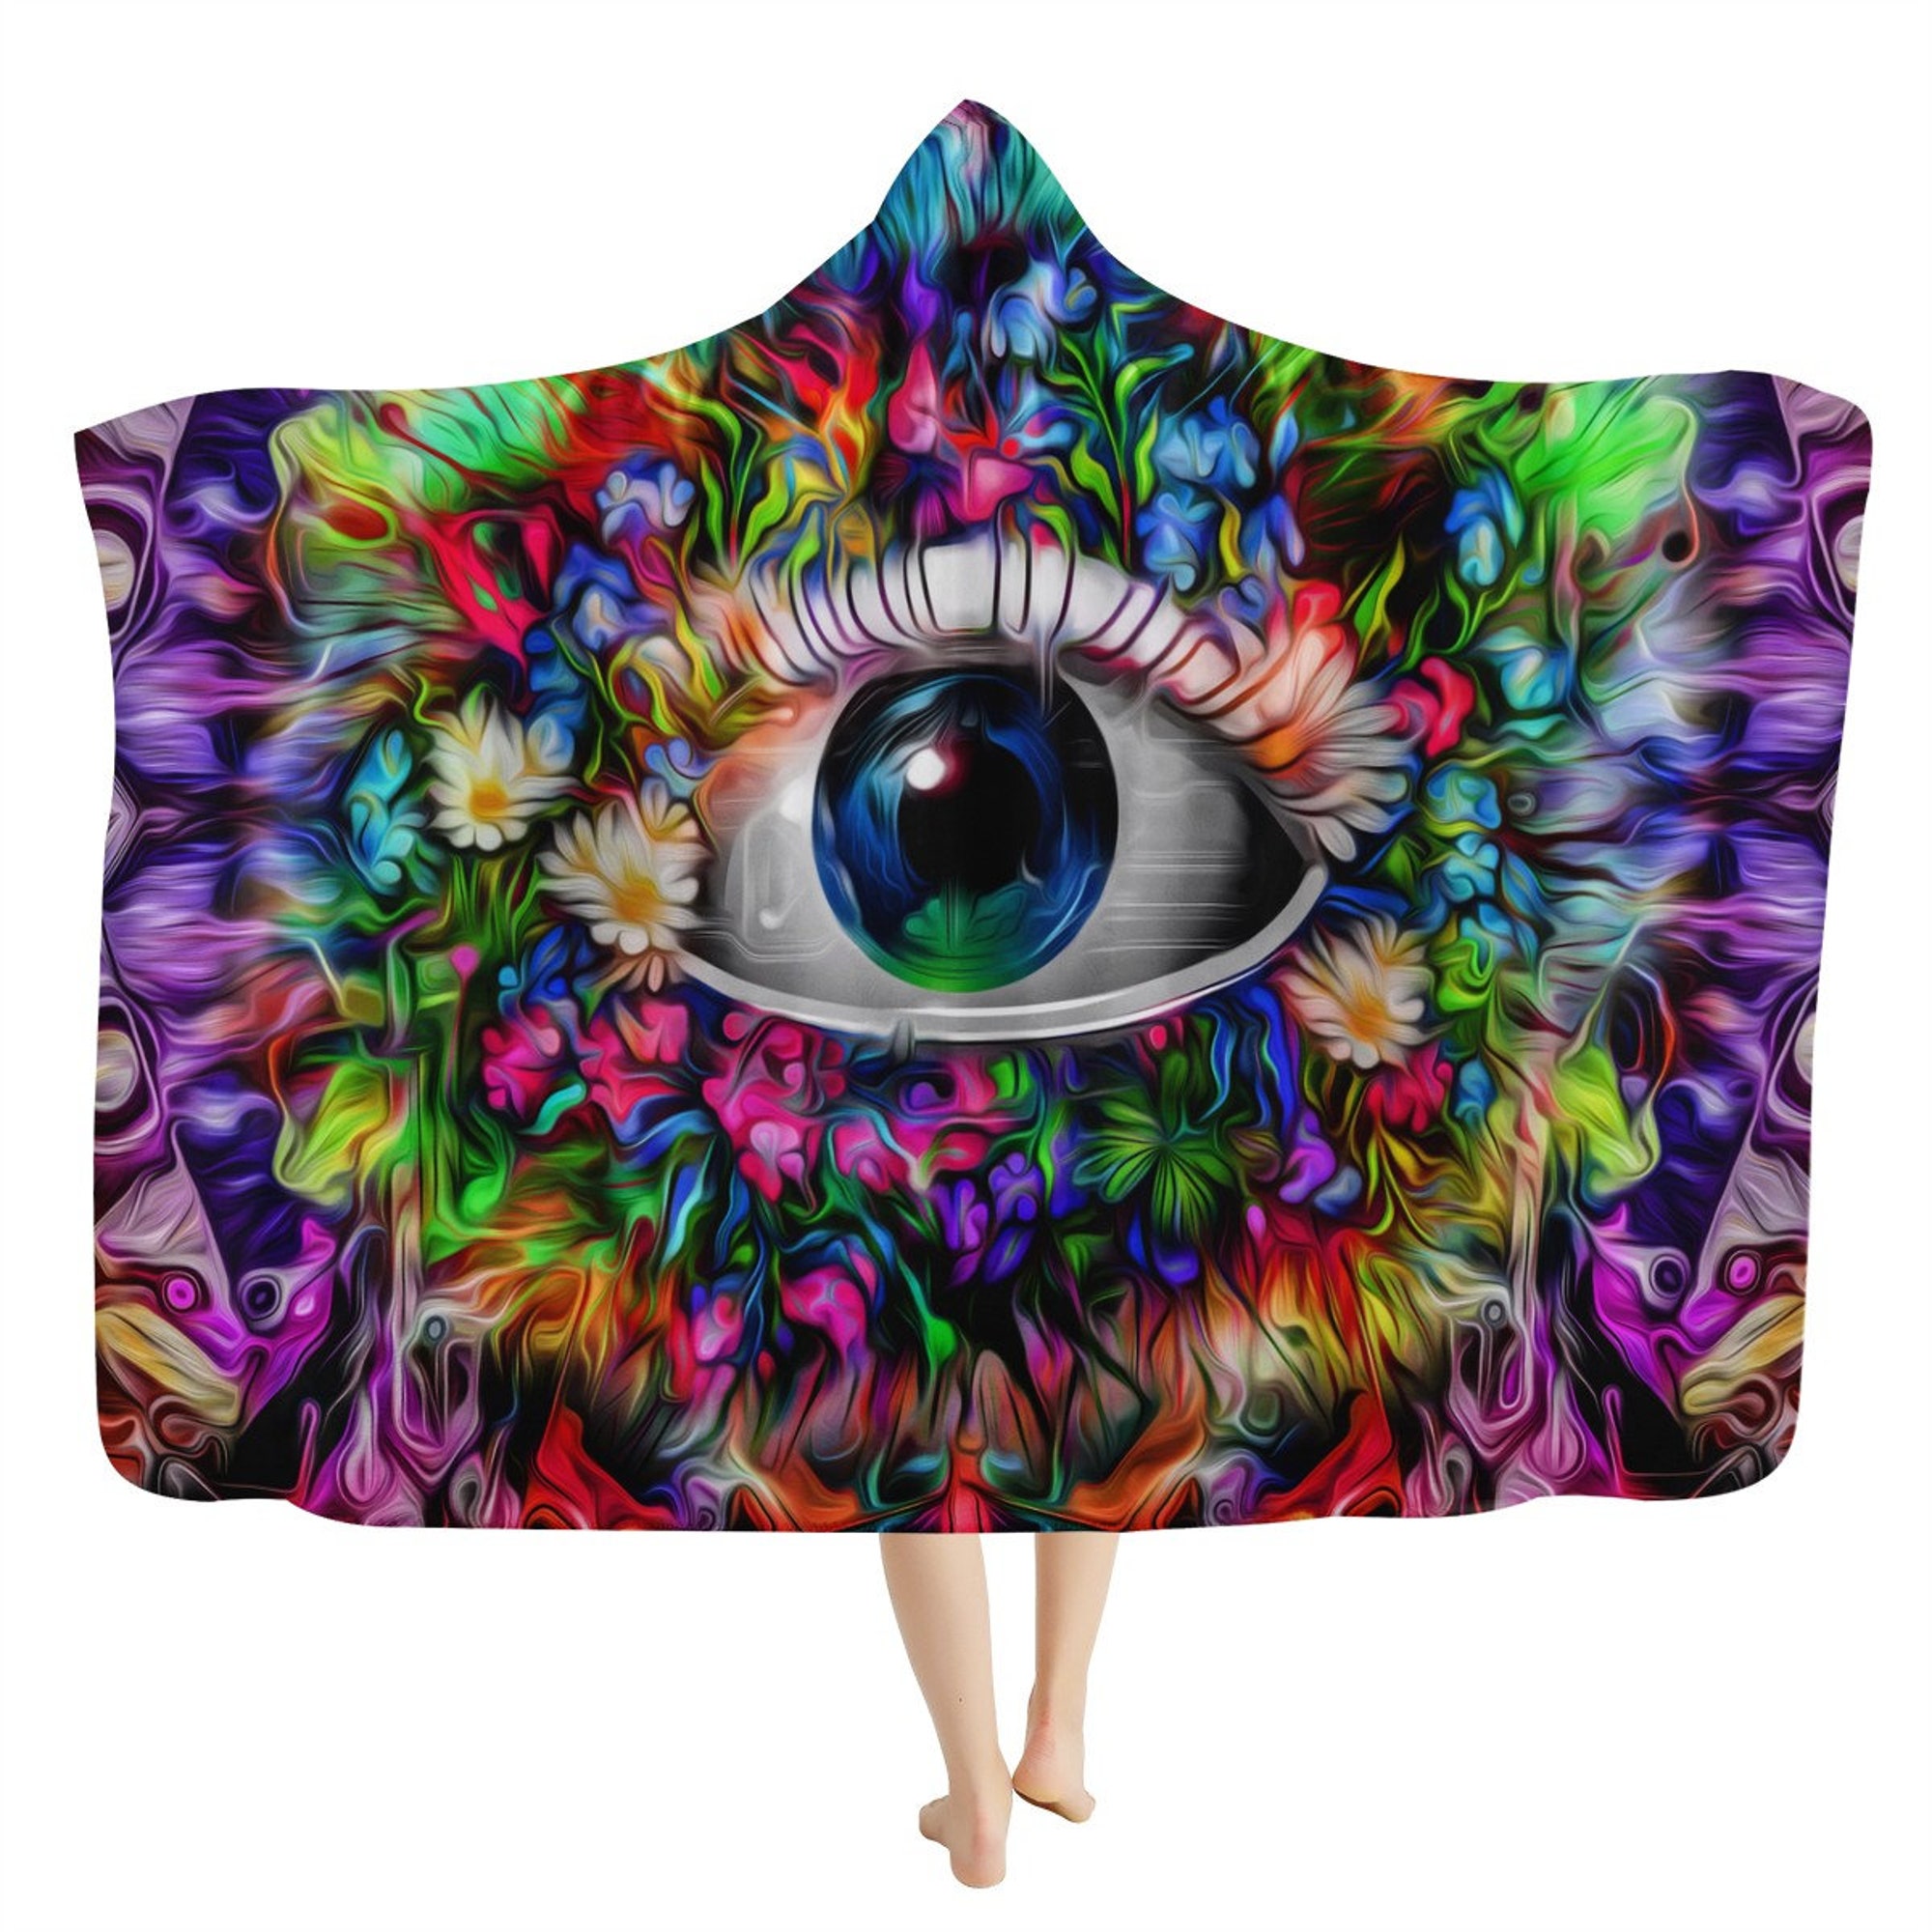 Discover Colorful Magical Eye Hooded Blanket